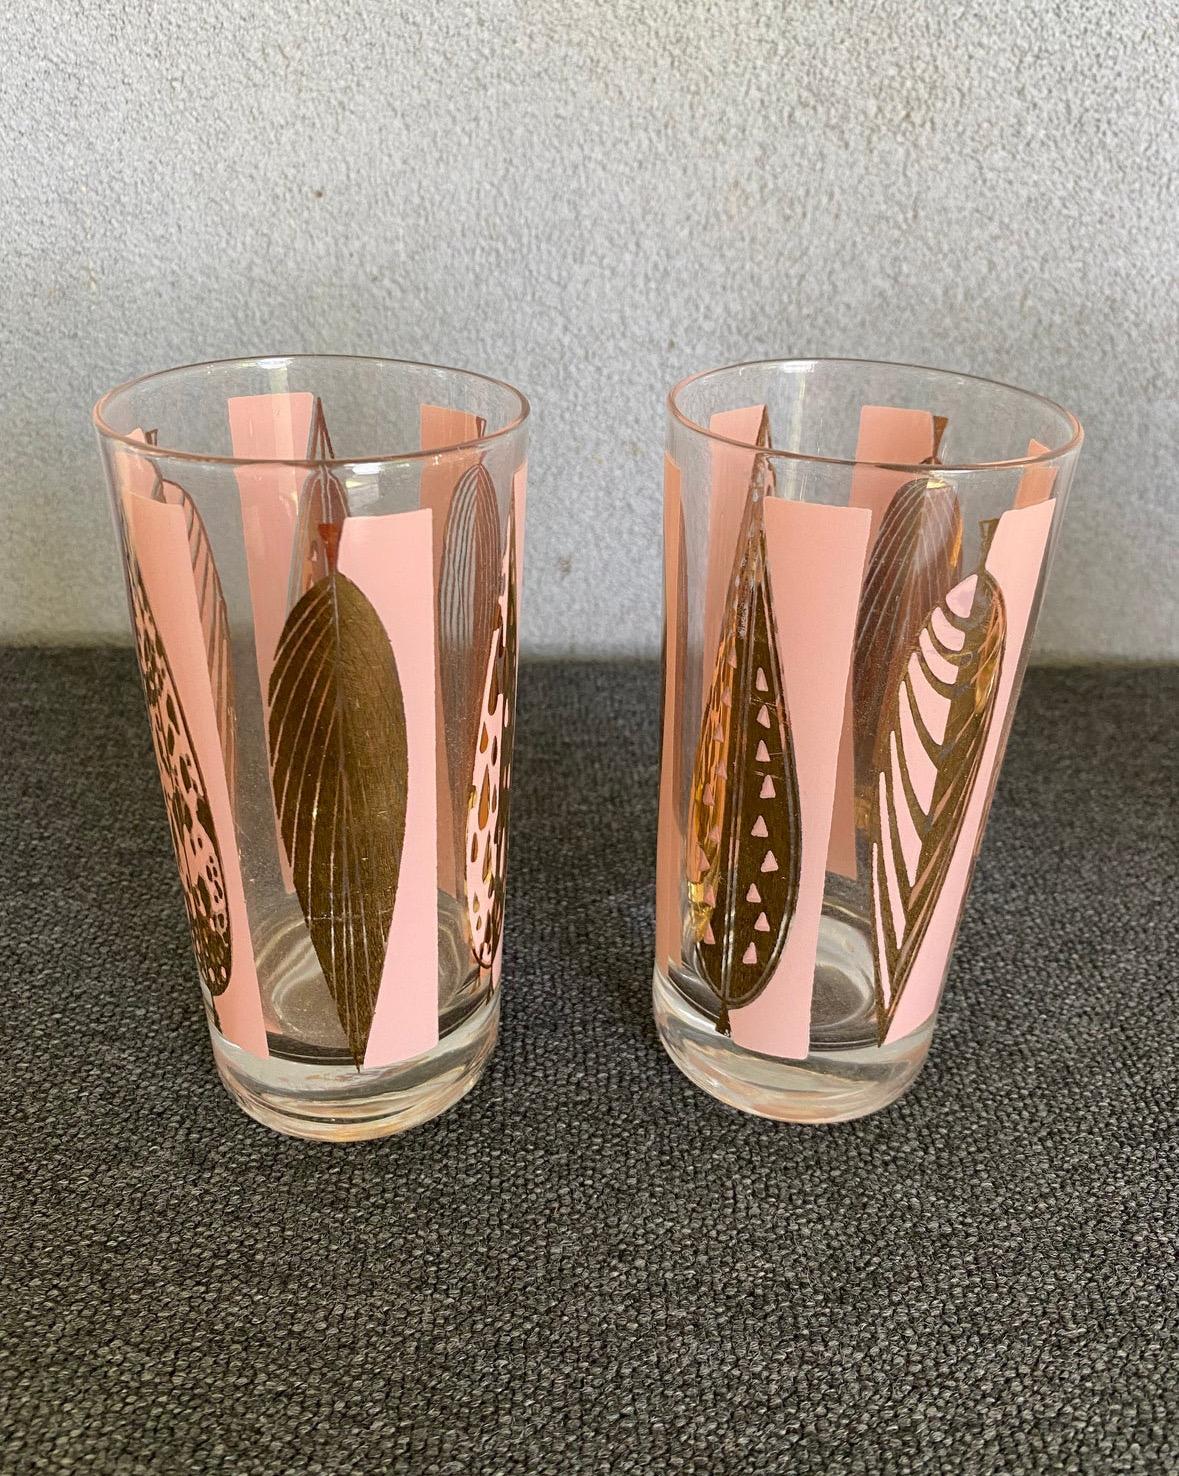 Fred Press Signed Mid-Century Pink and Clear 22-Karat Gold Leaves glasses Set of 6)
This beautiful Fred Press signed mid-century design featuring pink and 22-karat gold leaf on clear glasses is perfect for entertaining
This is one of Fred Press'